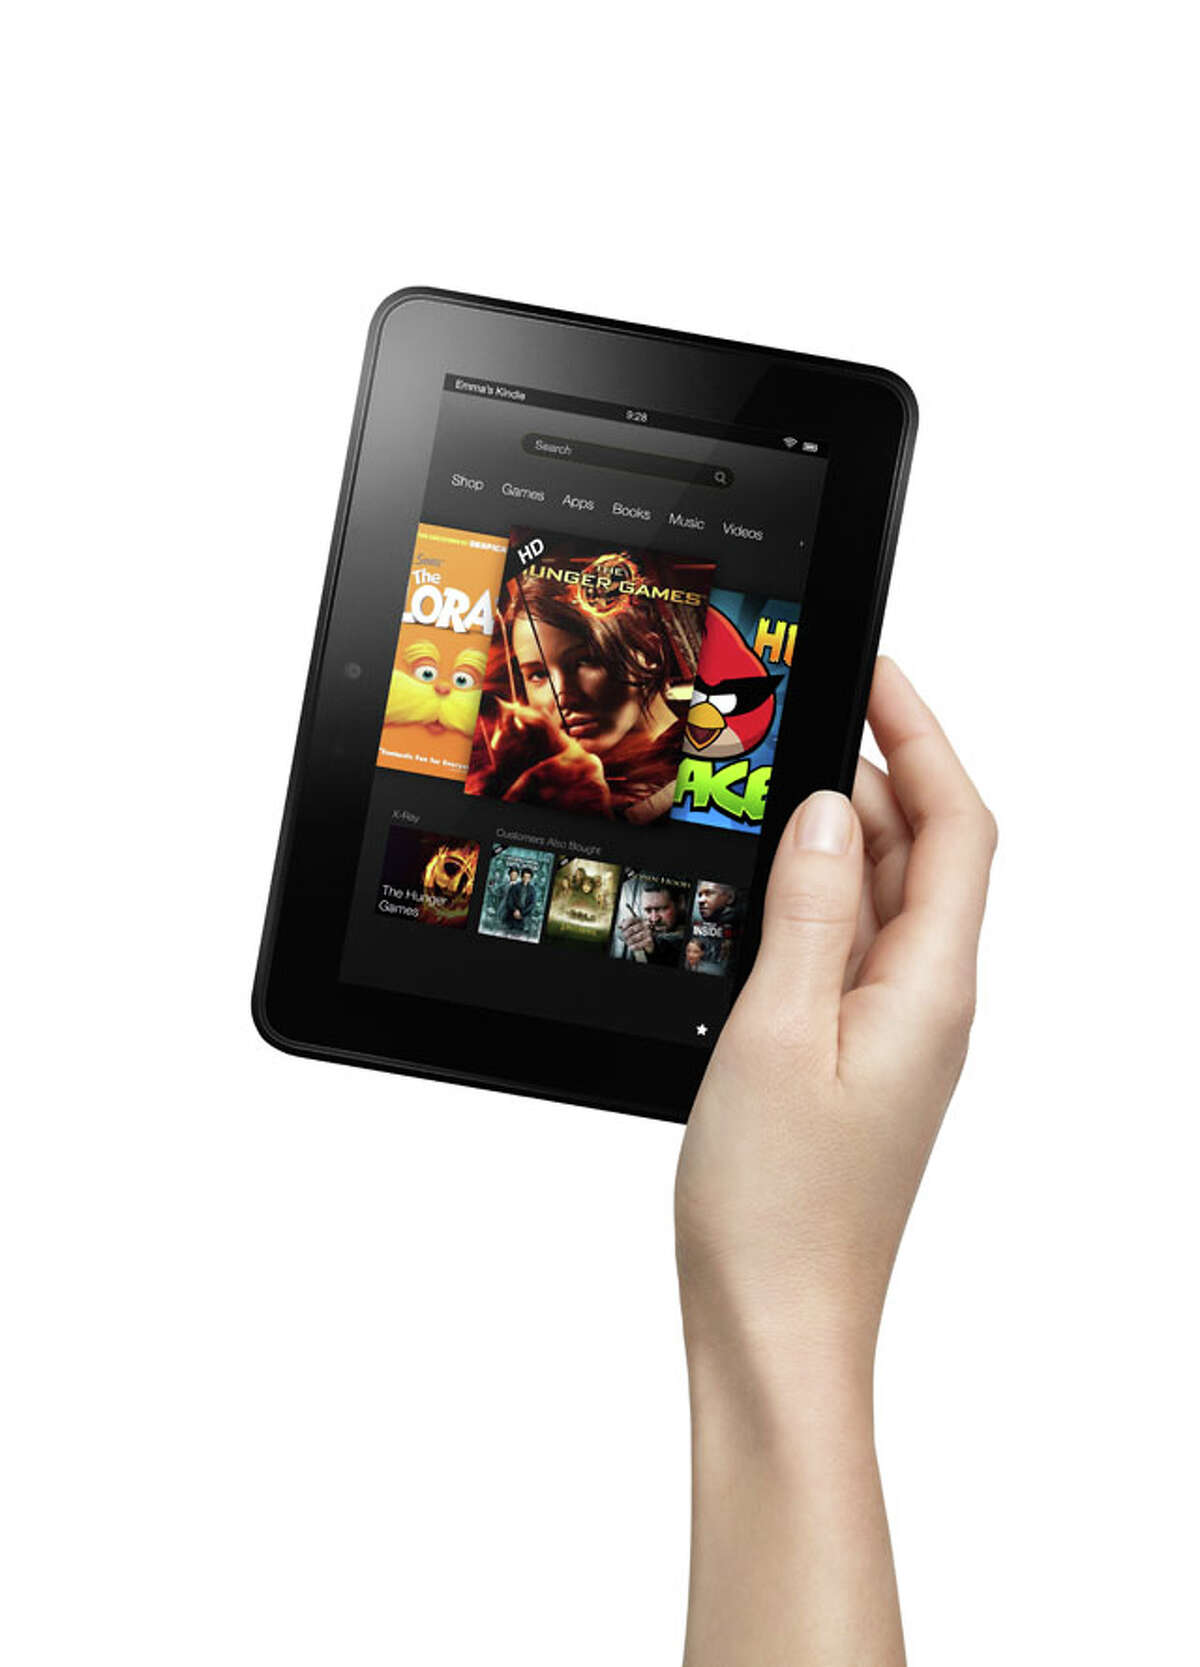 Tech Gifts - Kindle Fire HD ($199 at Amazon.com)